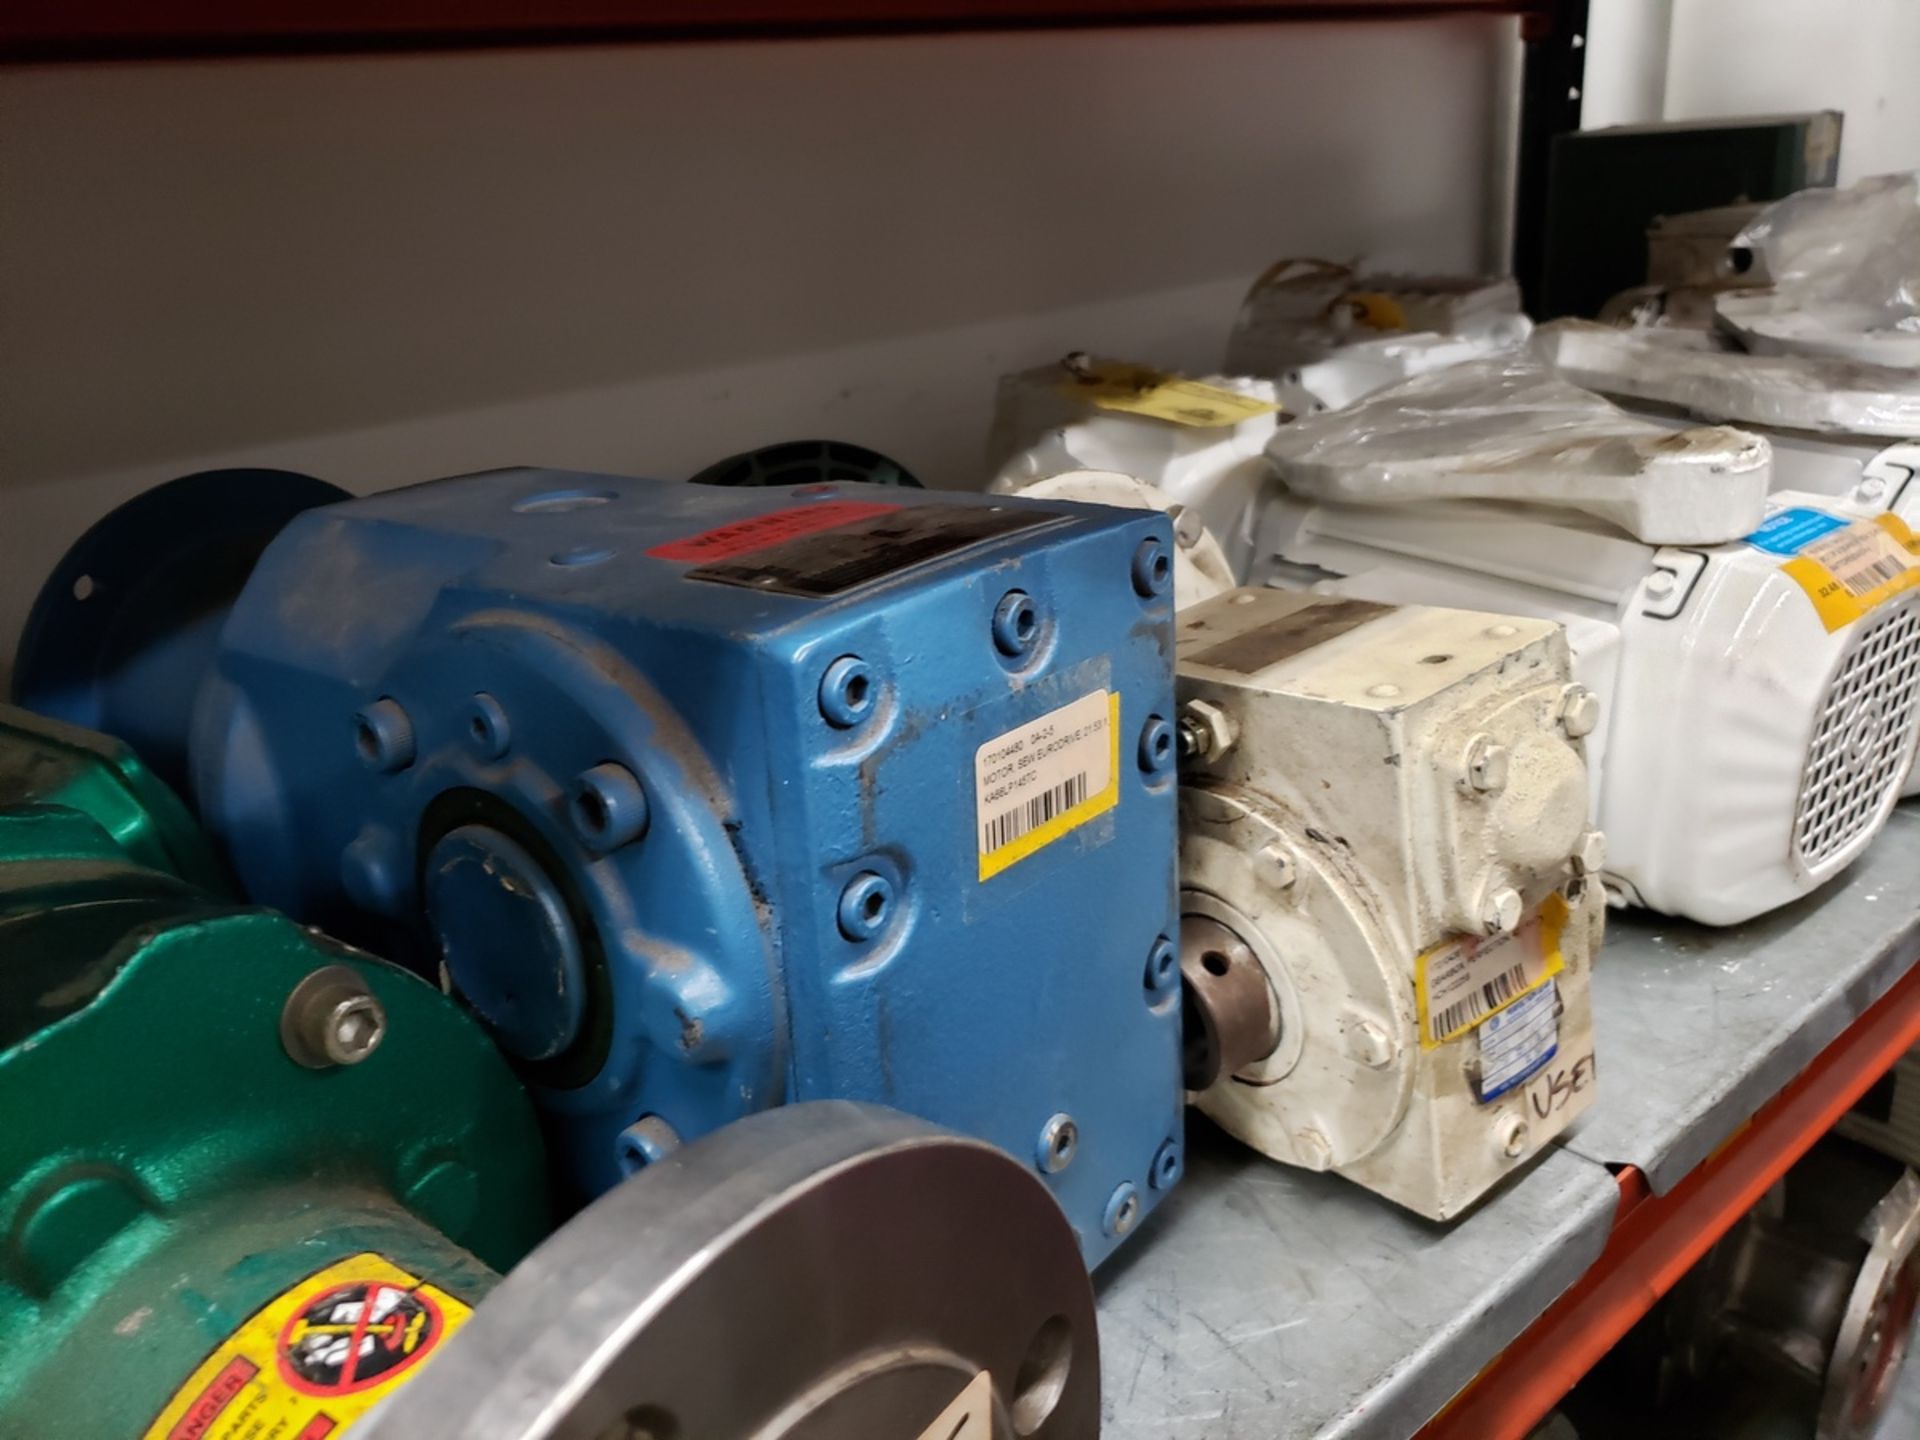 Lot of Pumps, Electric Motors & Gearboxes - Subj to Bulk | Reqd Rig Fee: $100 - Image 4 of 6